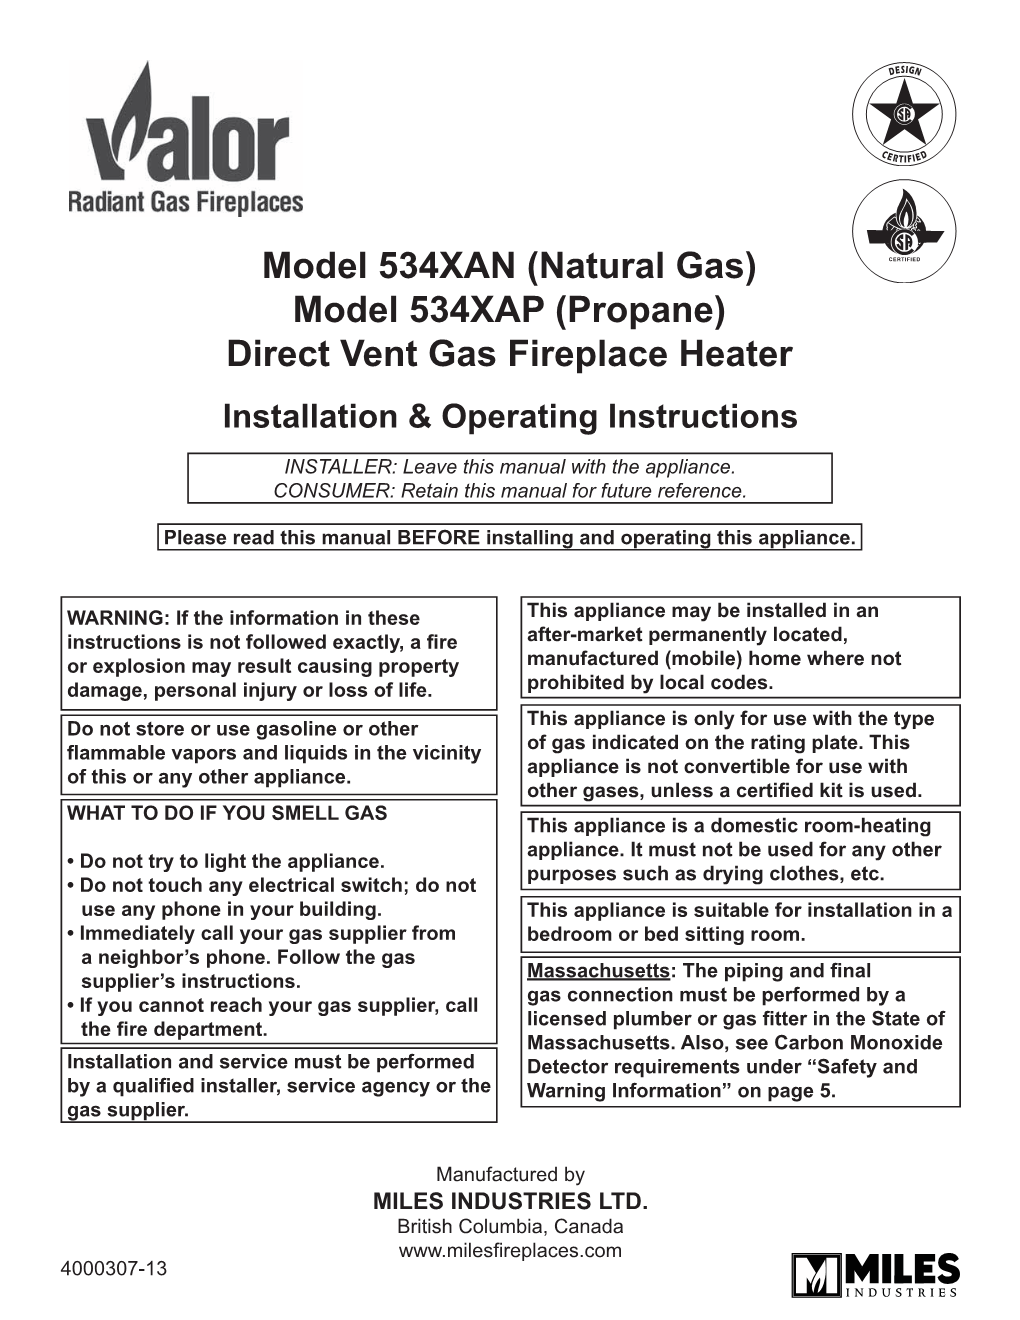 Model 534XAN (Natural Gas) Model 534XAP (Propane) Direct Vent Gas Fireplace Heater Installation & Operating Instructions